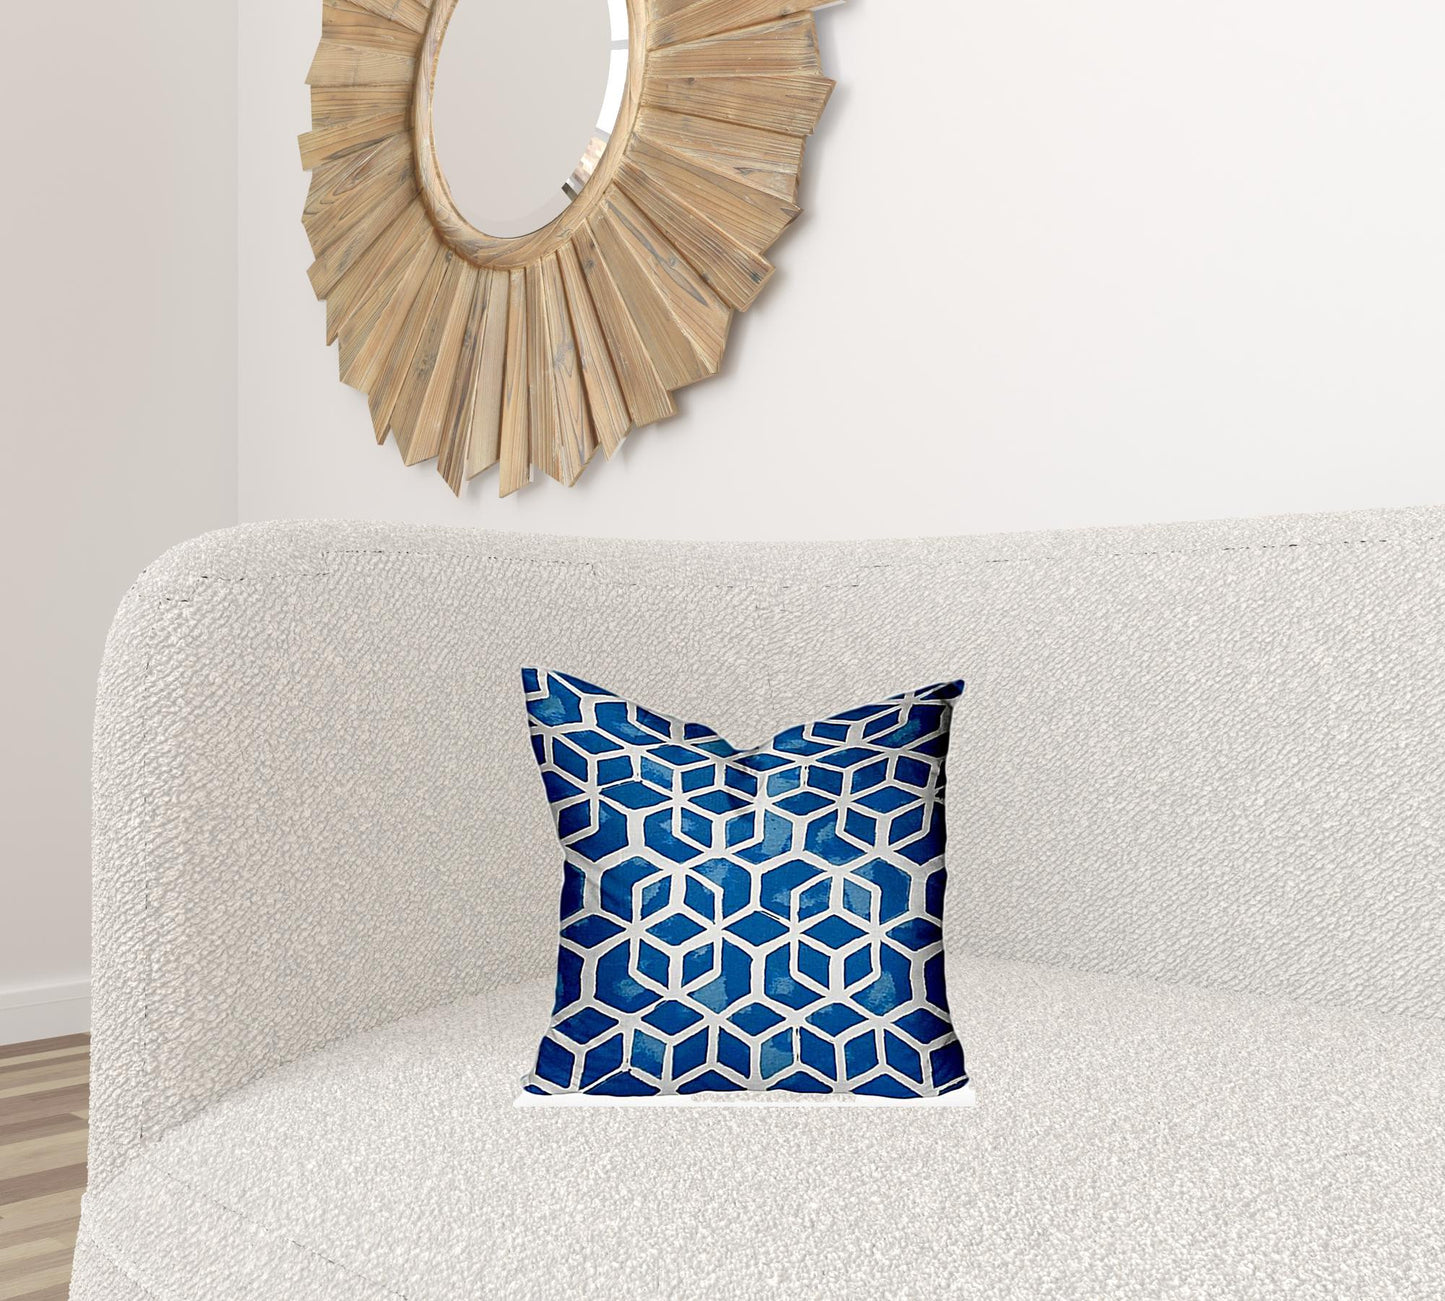 16" X 16" Blue And White Zippered Geometric Throw Indoor Outdoor Pillow Cover